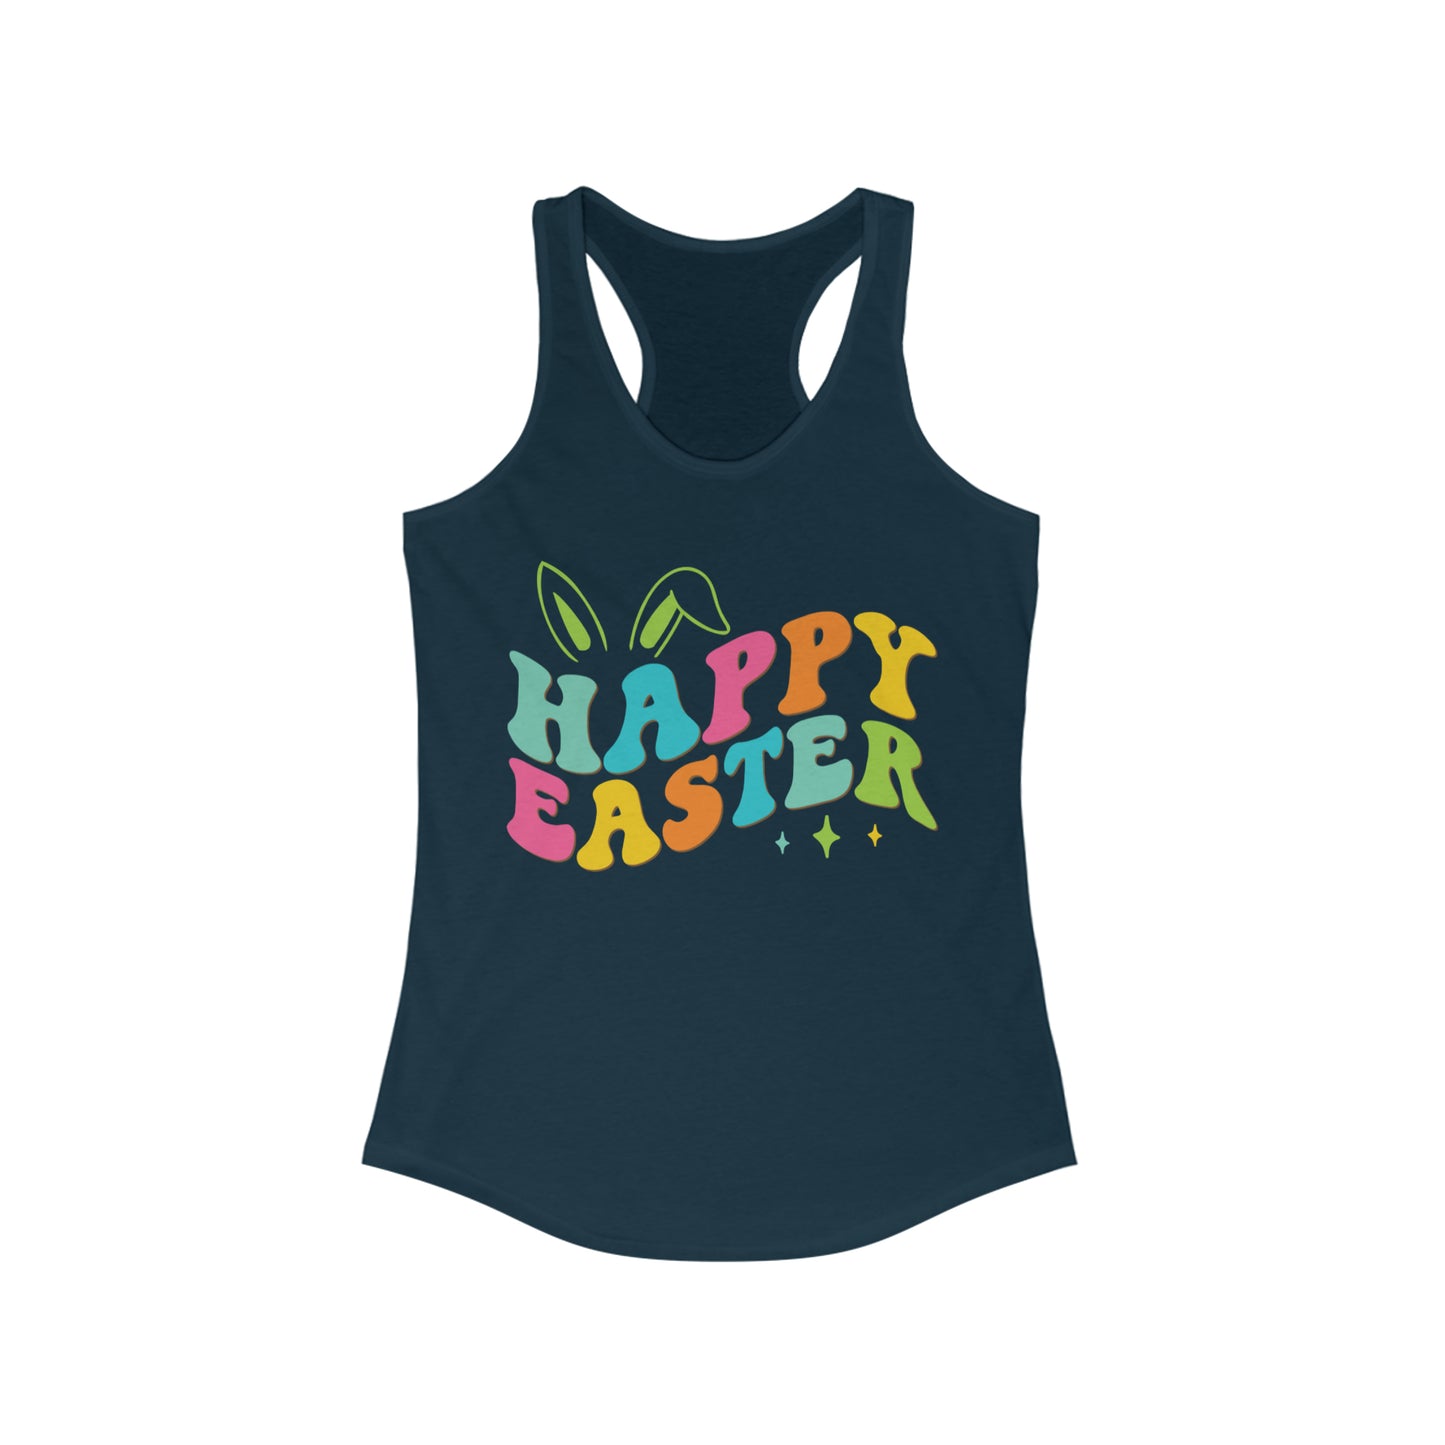 Happy Easter Ears Tank Top For Easter Bunny Shirt For Spring Rabbit Ears Top